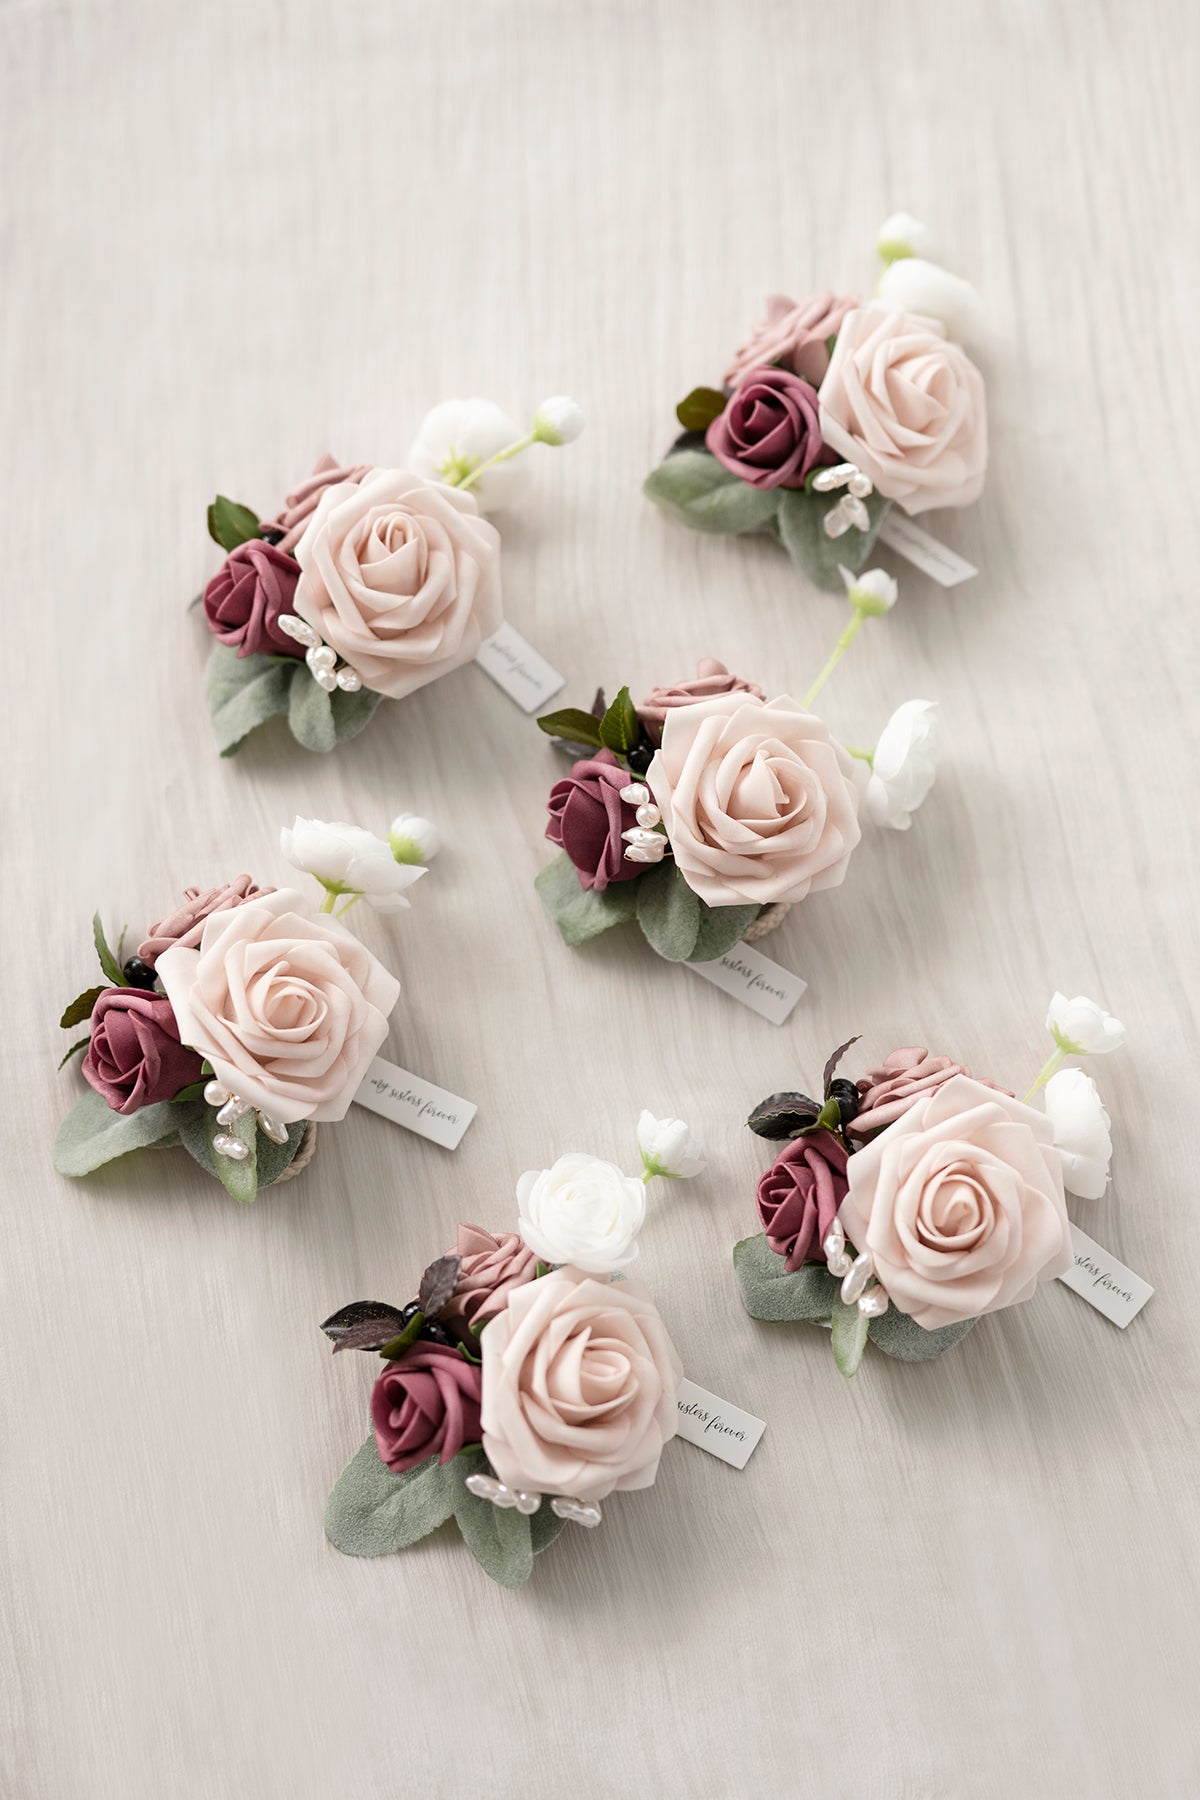 Wrist Corsages in Dusty Rose & Mauve